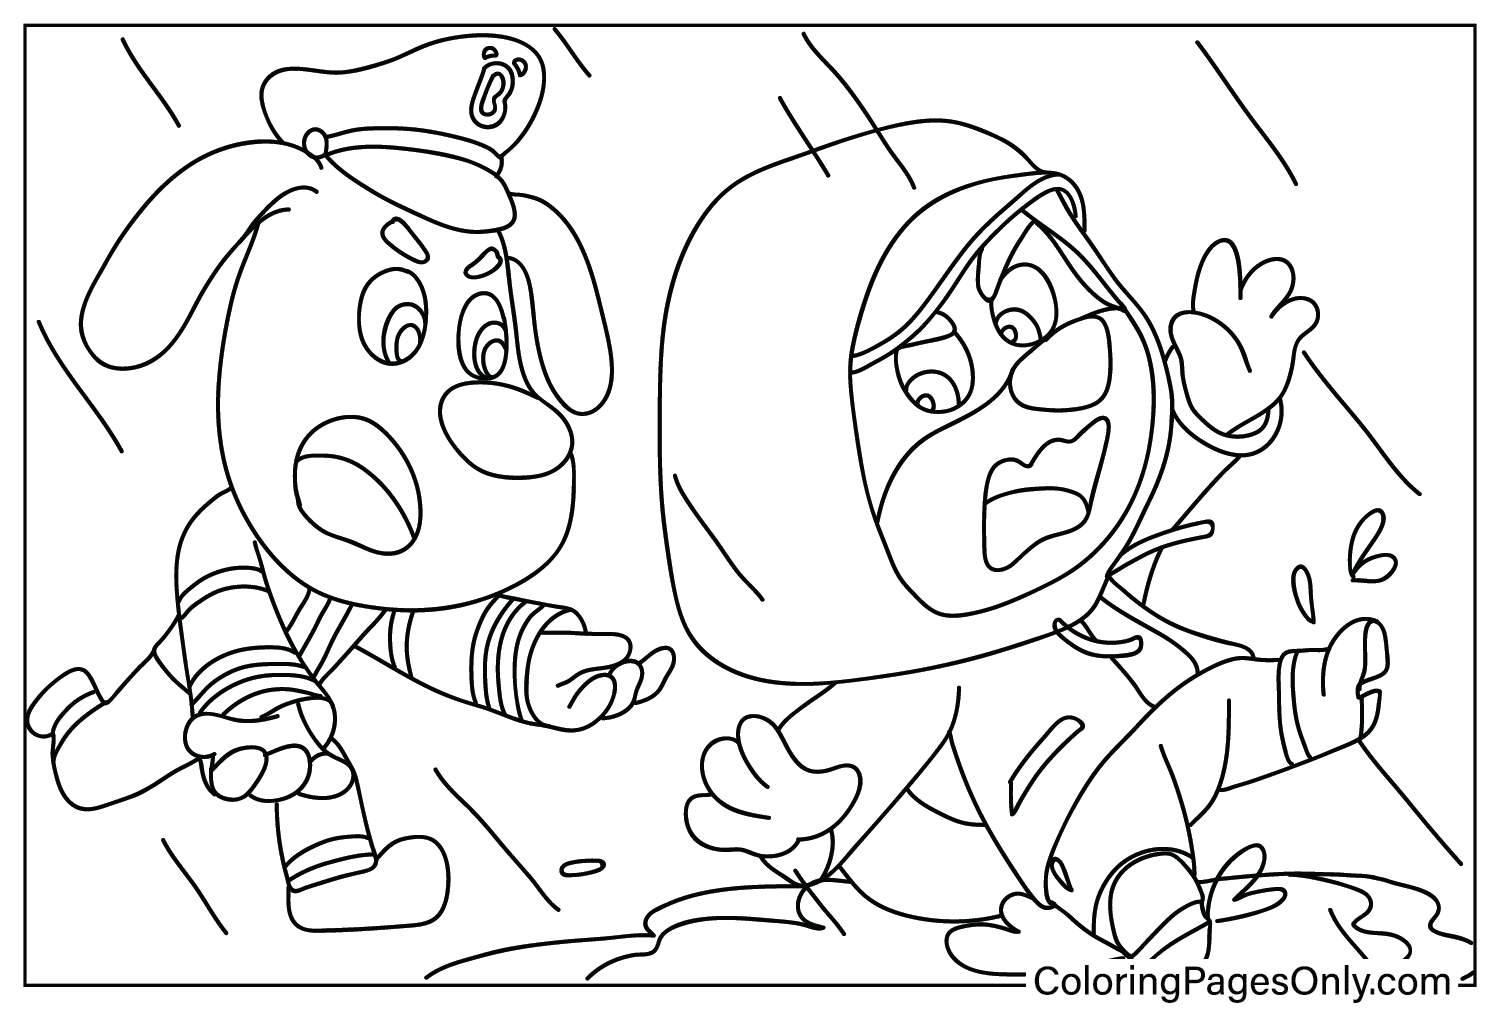 Safety Sheriff Labrador Coloring Sheet from Safety Sheriff Labrador